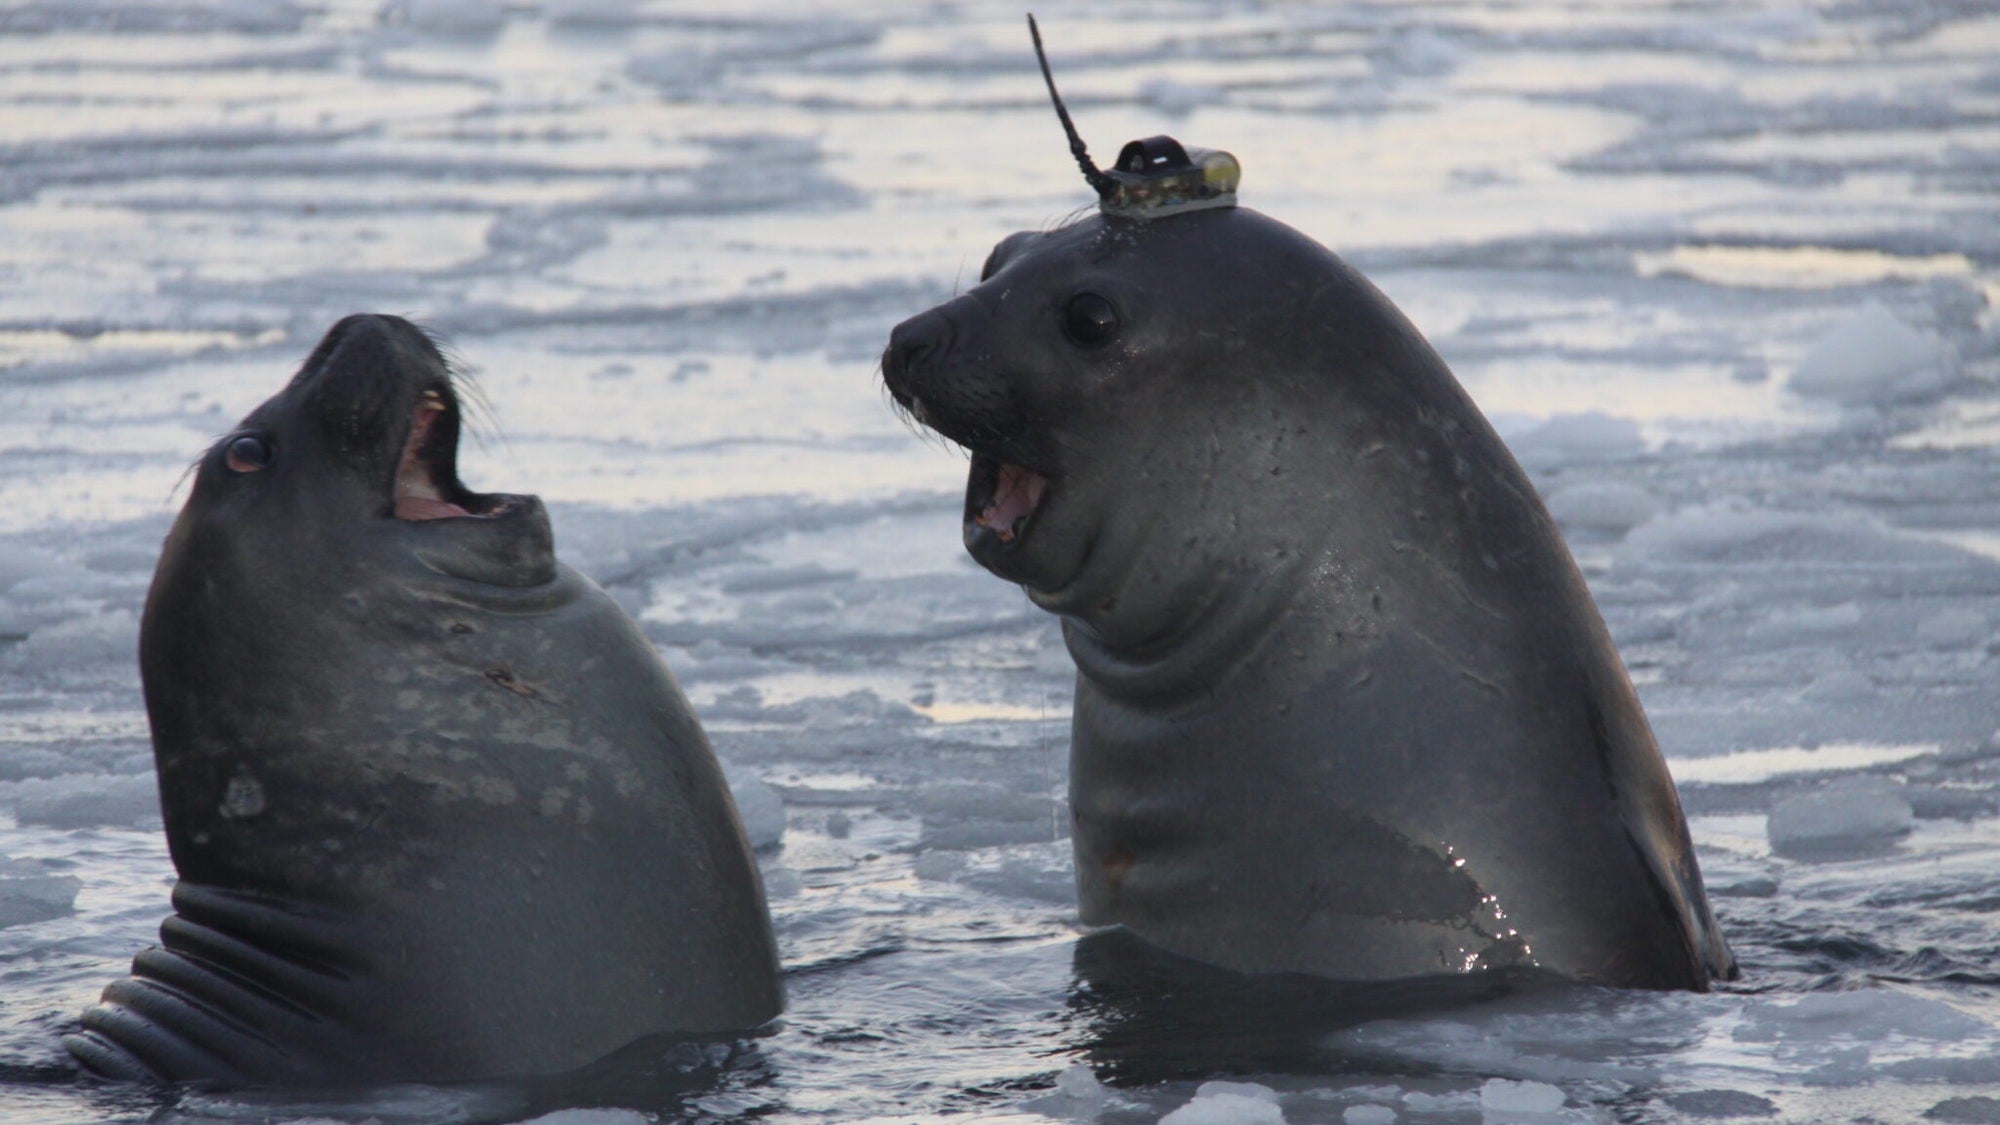 Seals with humorous hats are serving to map the Antarctic seascape